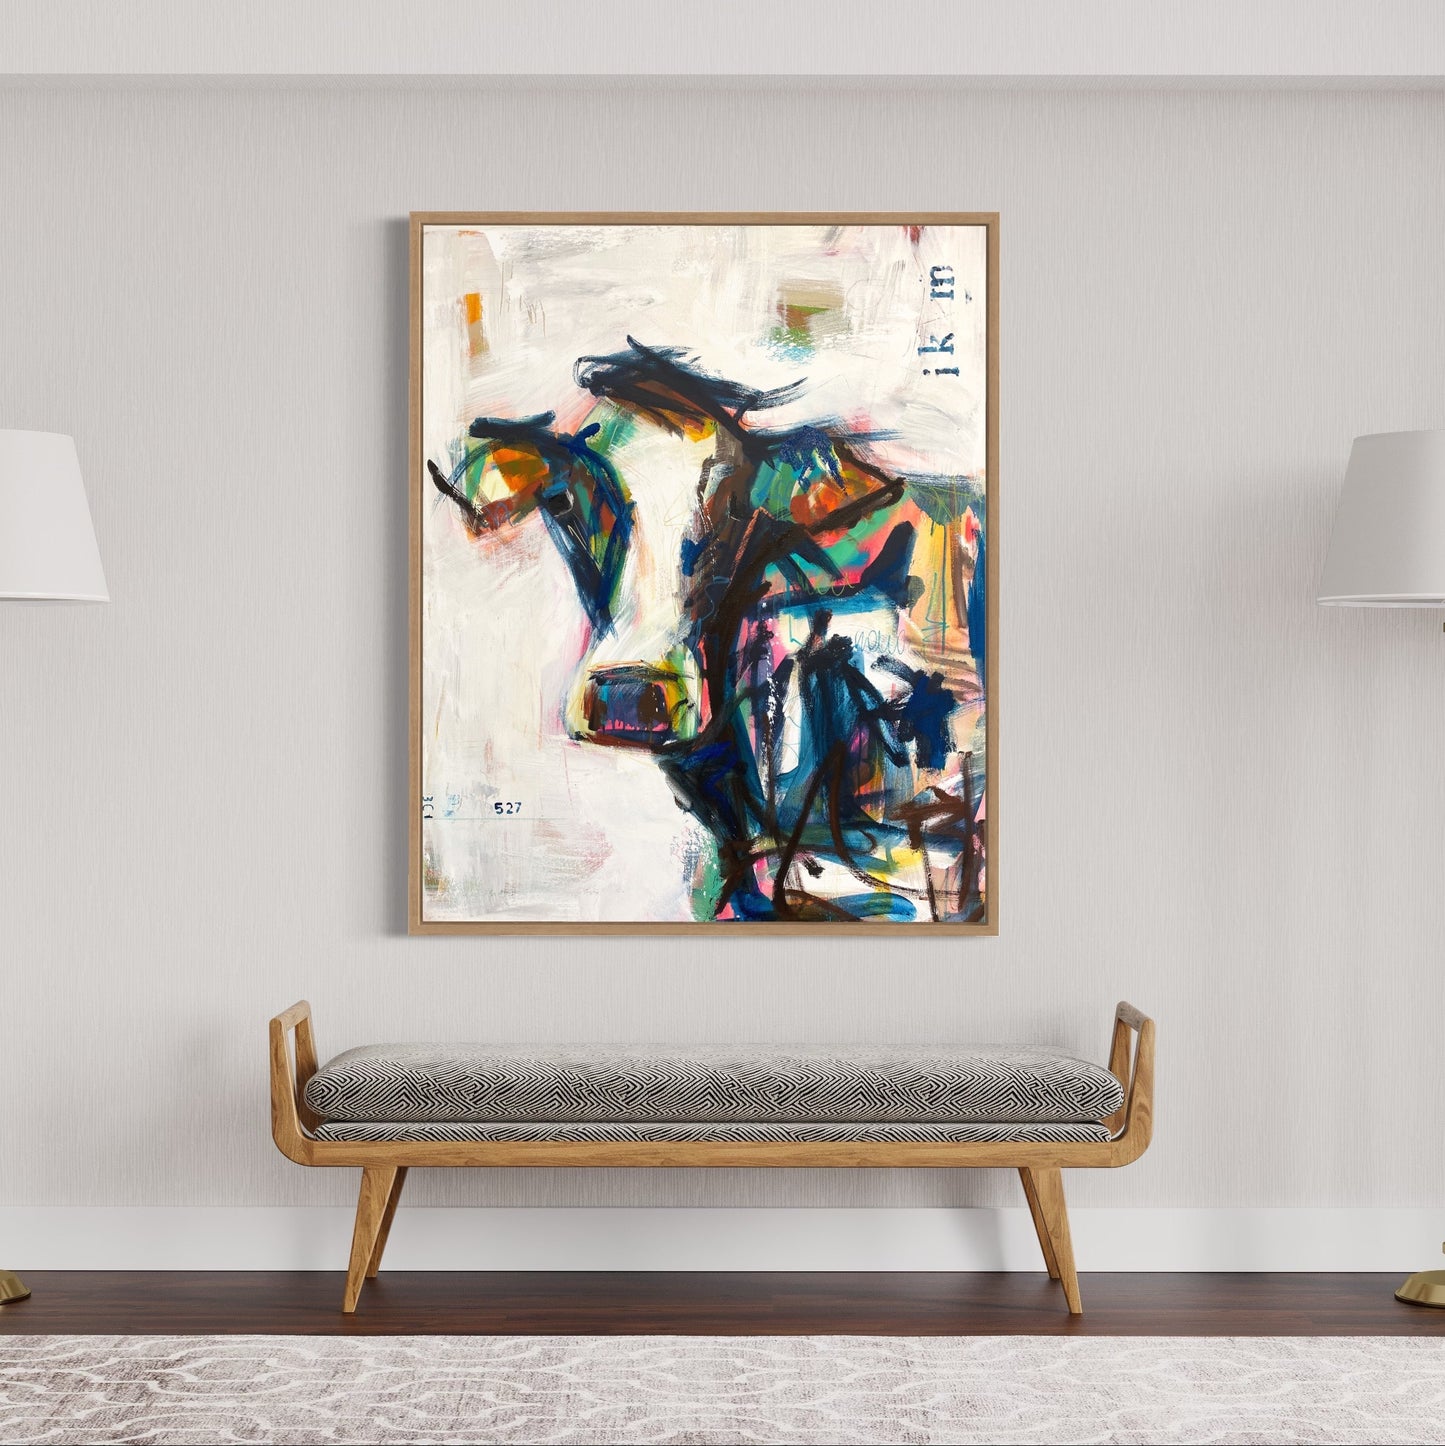 Buttercup - by Australian Artist Rose Hewartson Original Abstract Painting on Canvas Framed 96x123 cm Statement Piece